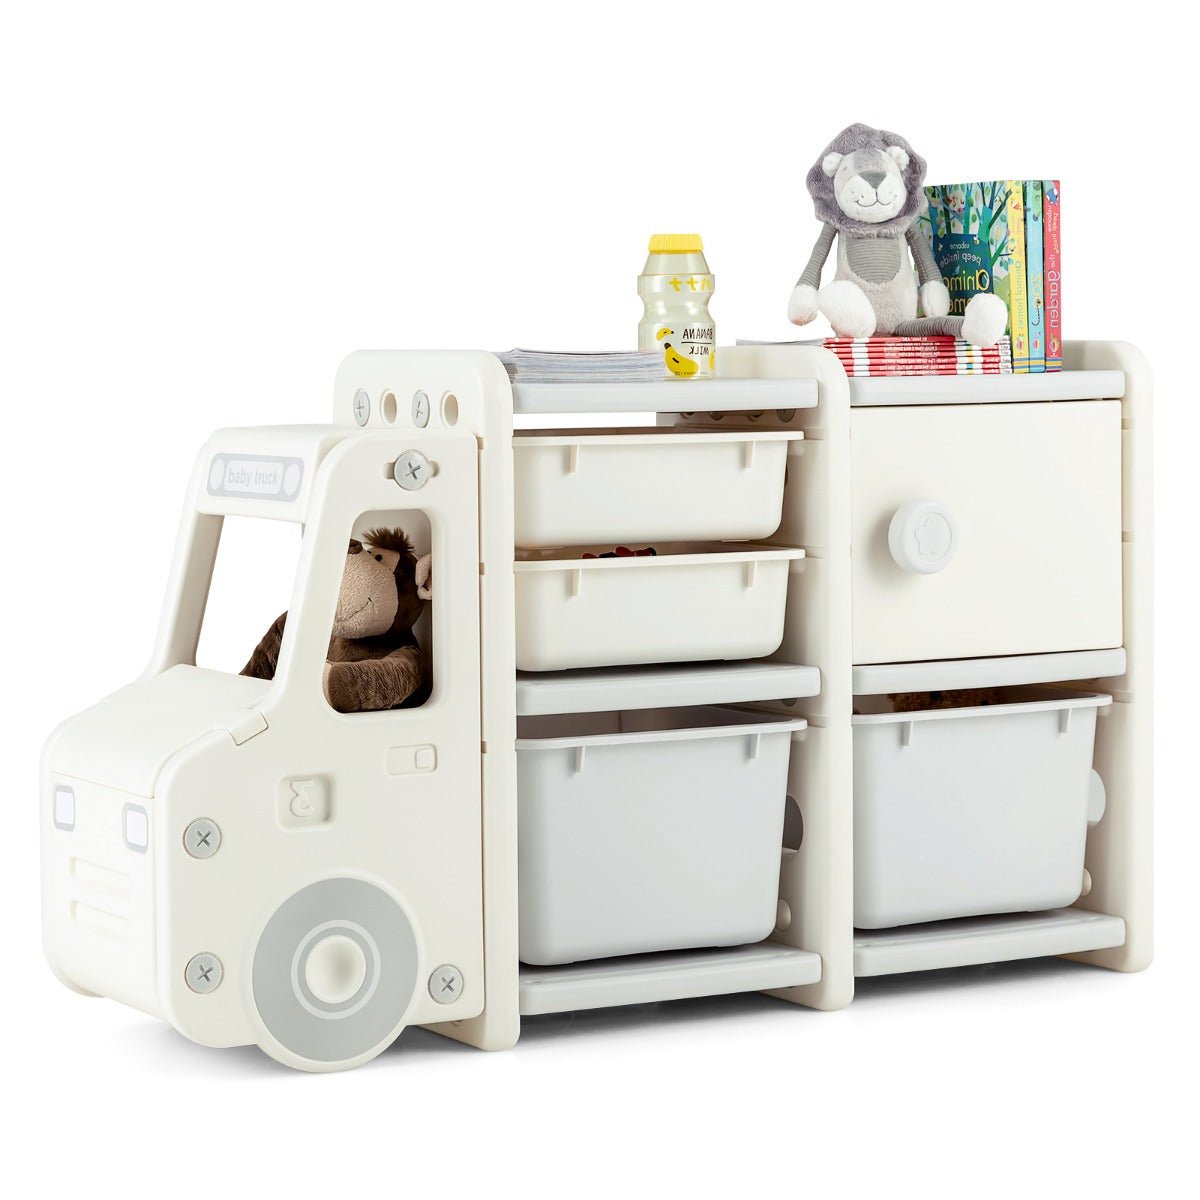 Grey Truck Shaped Kids Storage Cabinet: Your Child's Perfect Playroom Companion at Kids Mega Mart